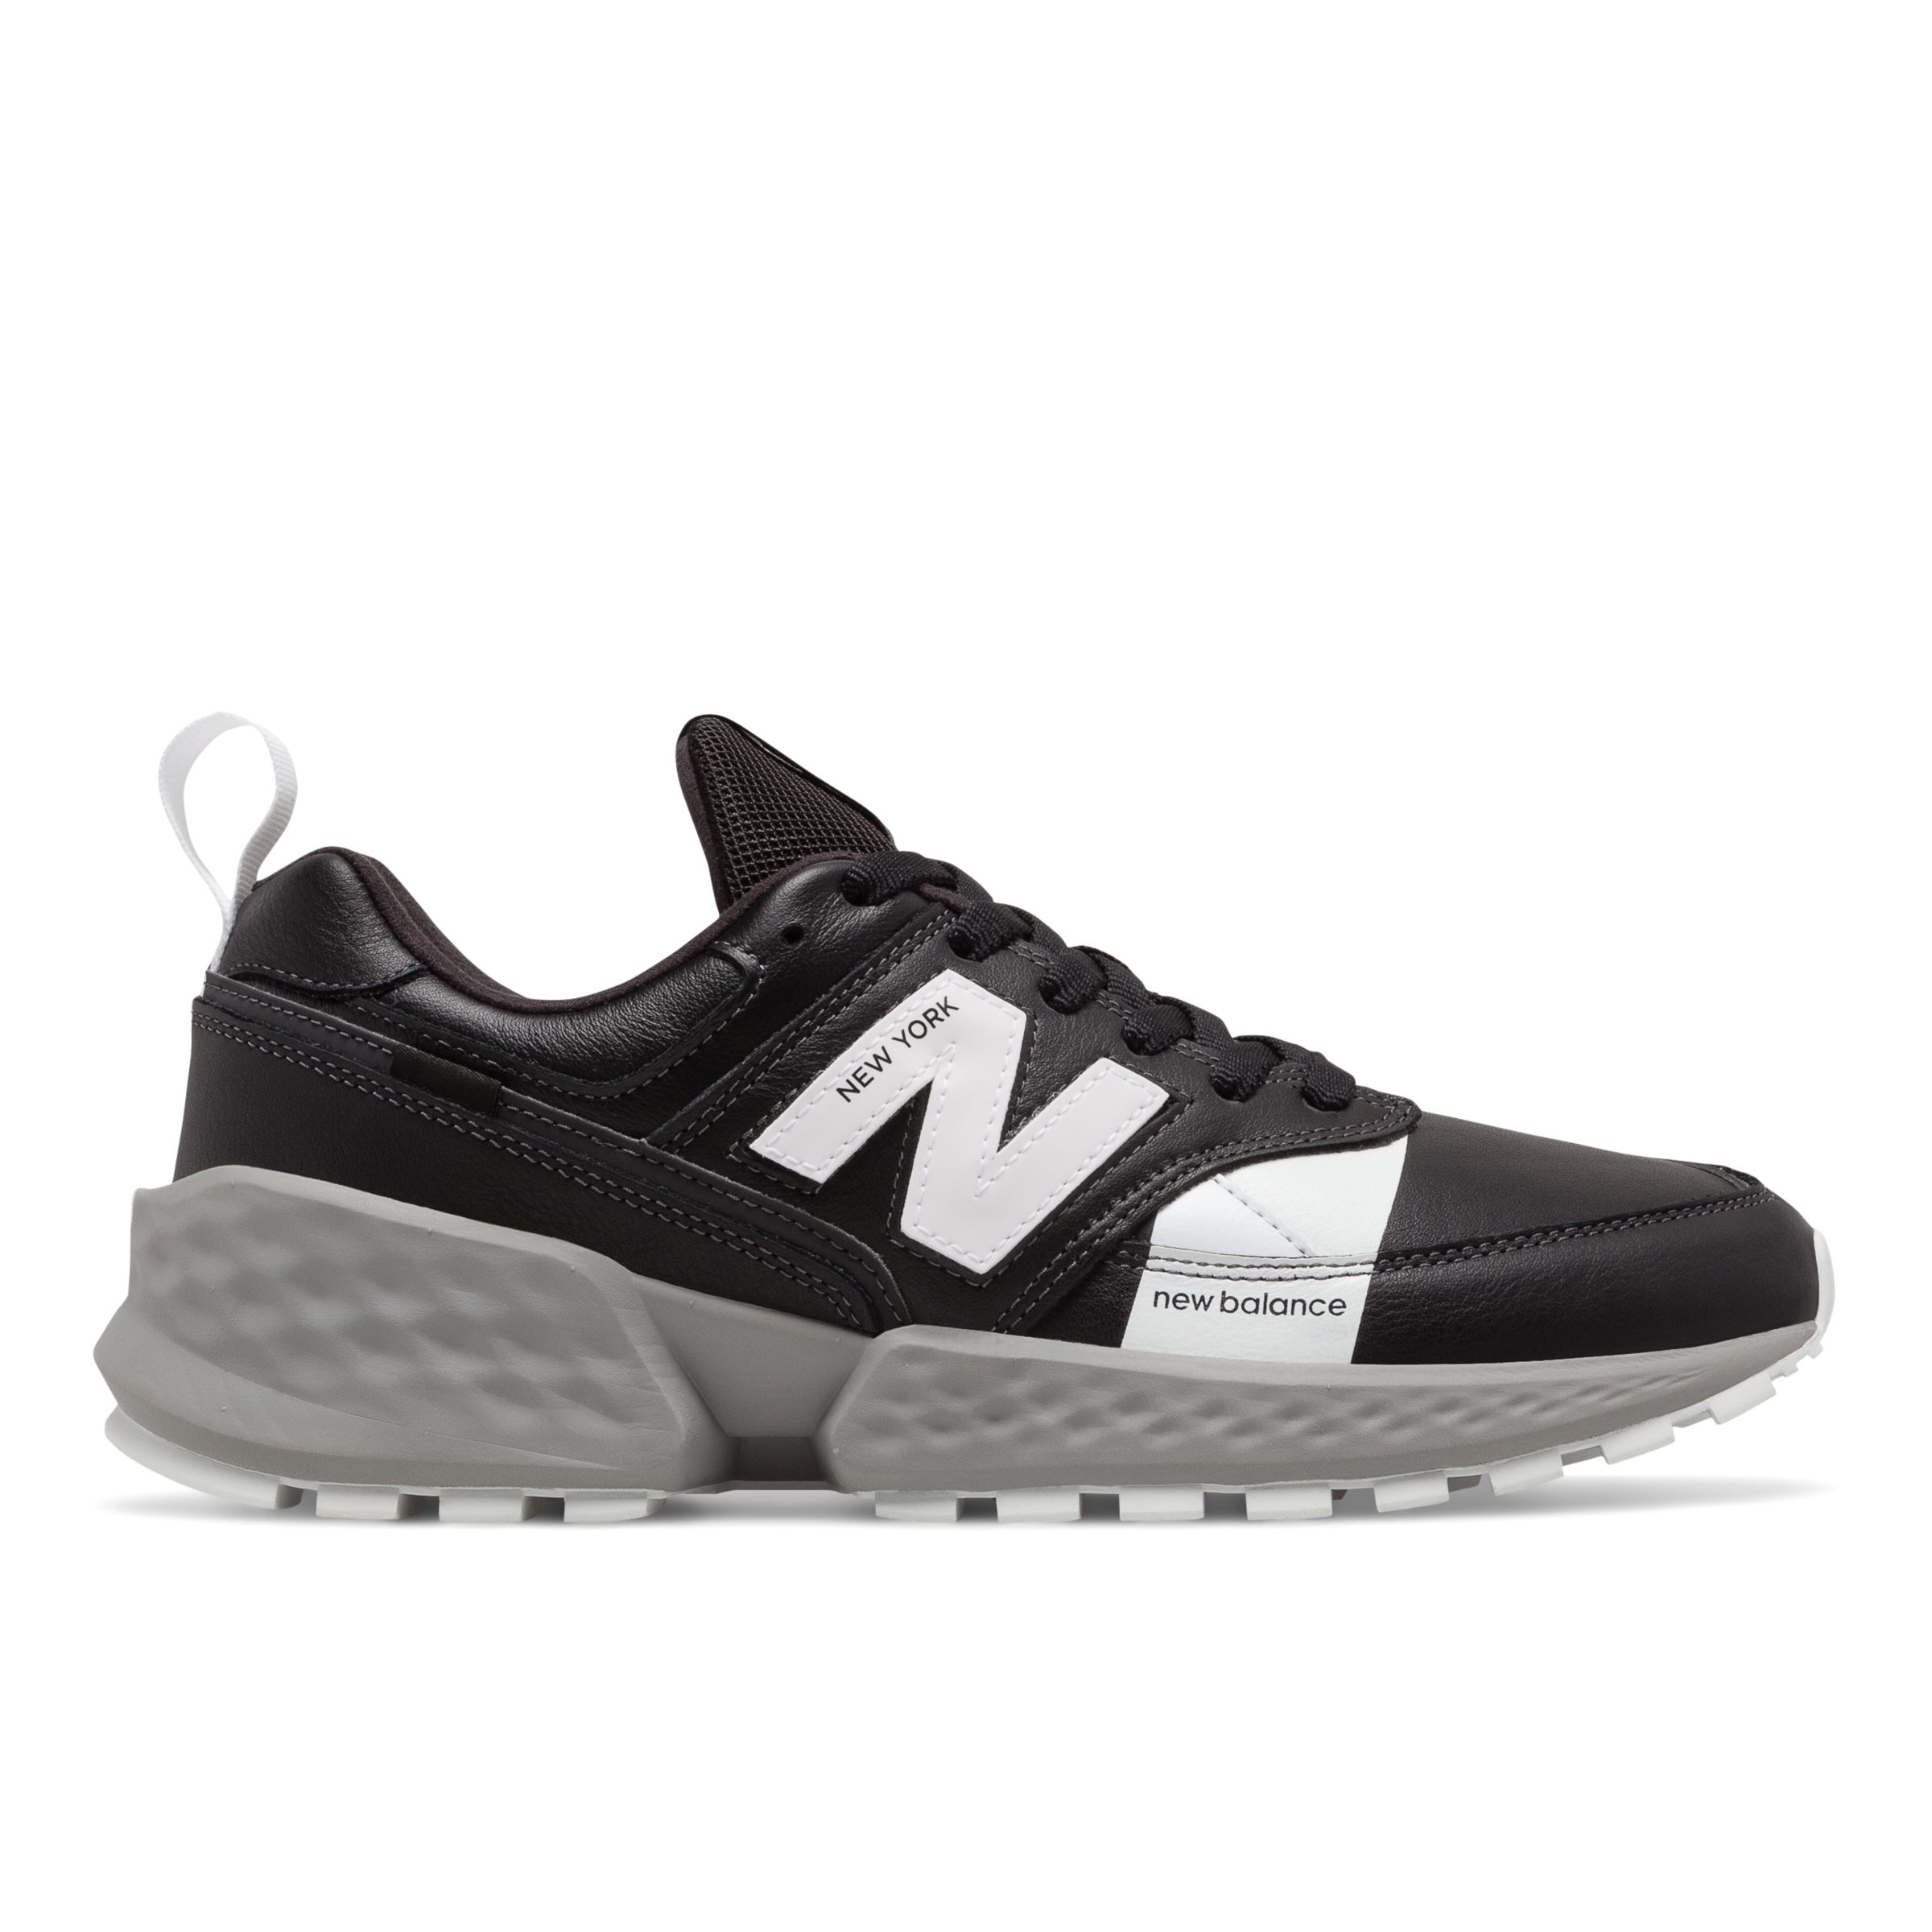 Latest Looks in Classic Shoes for Men - New Balance